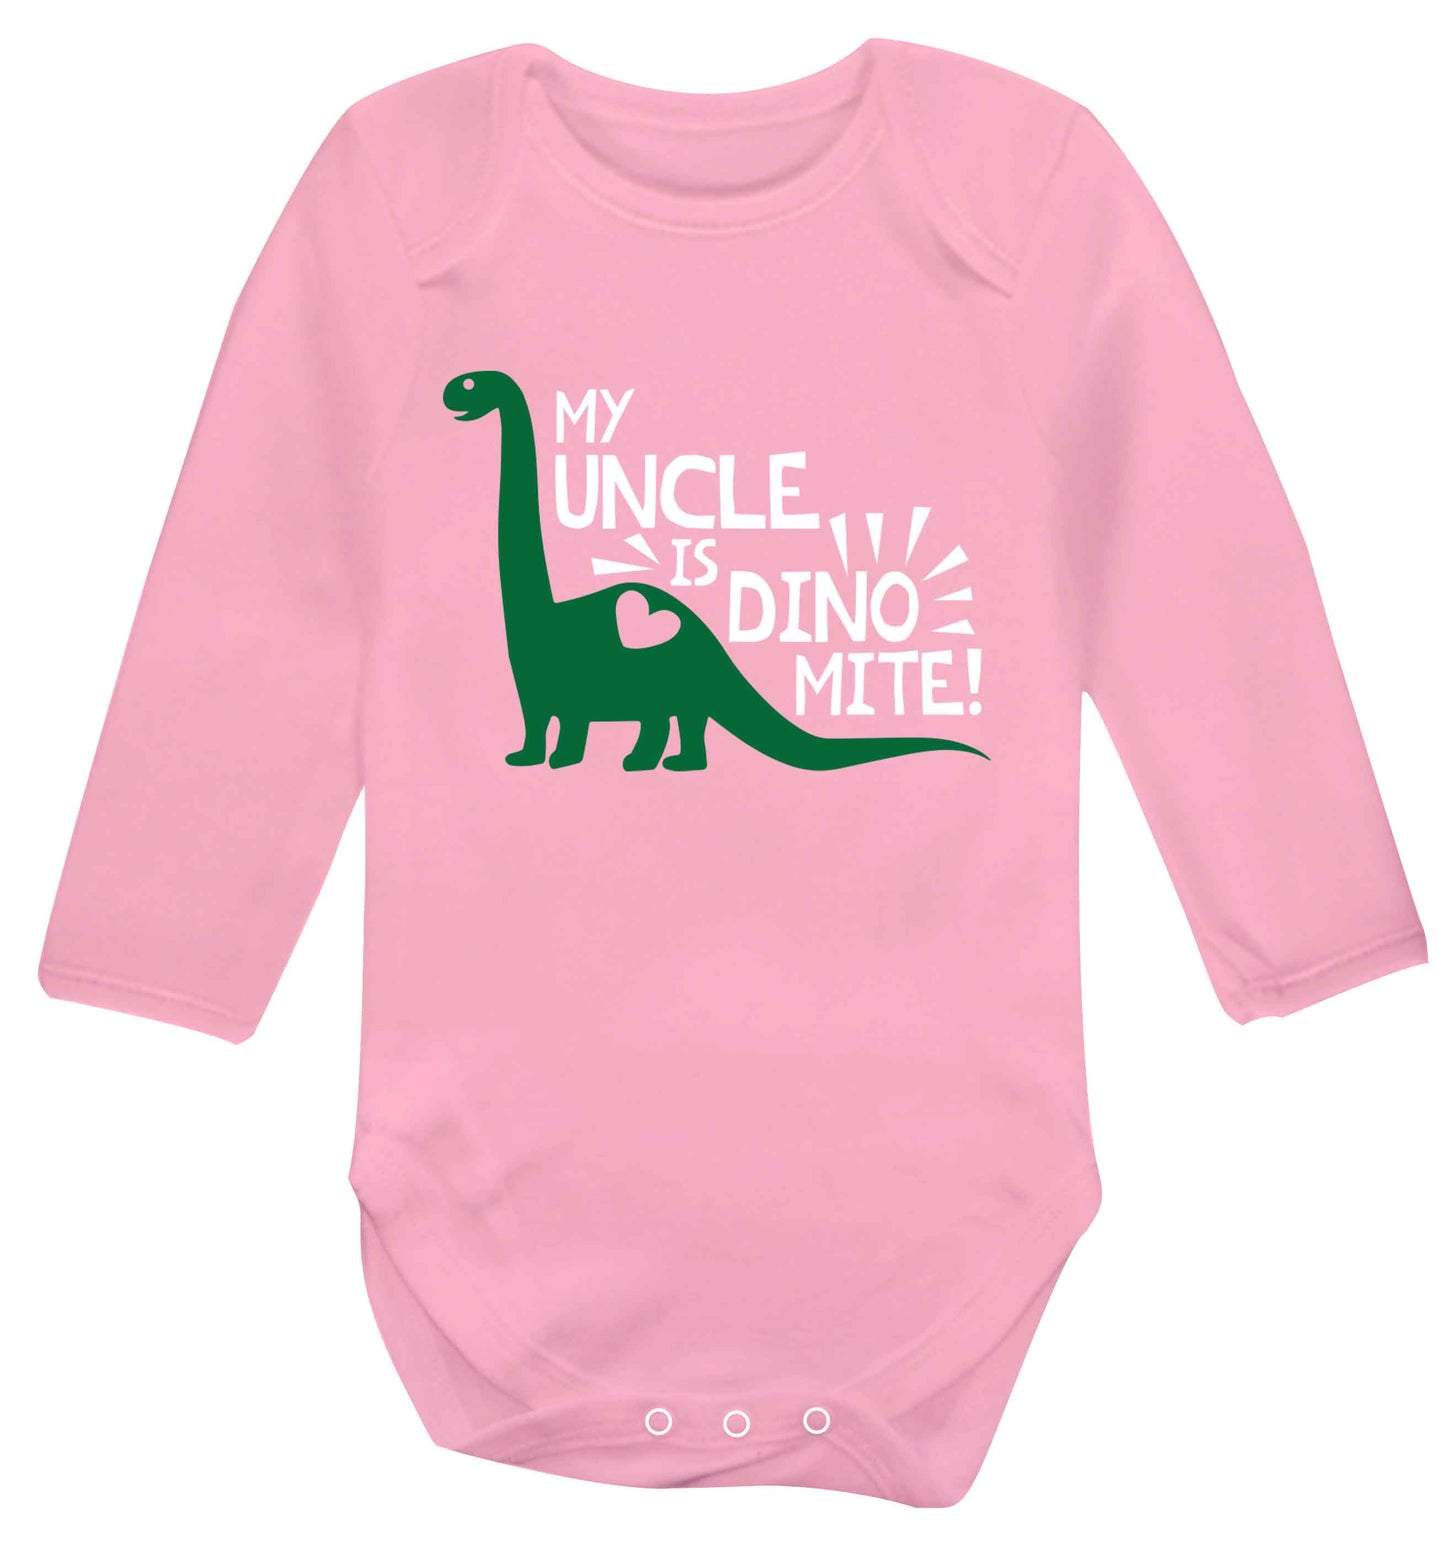 My uncle is dinomite! Baby Vest long sleeved pale pink 6-12 months